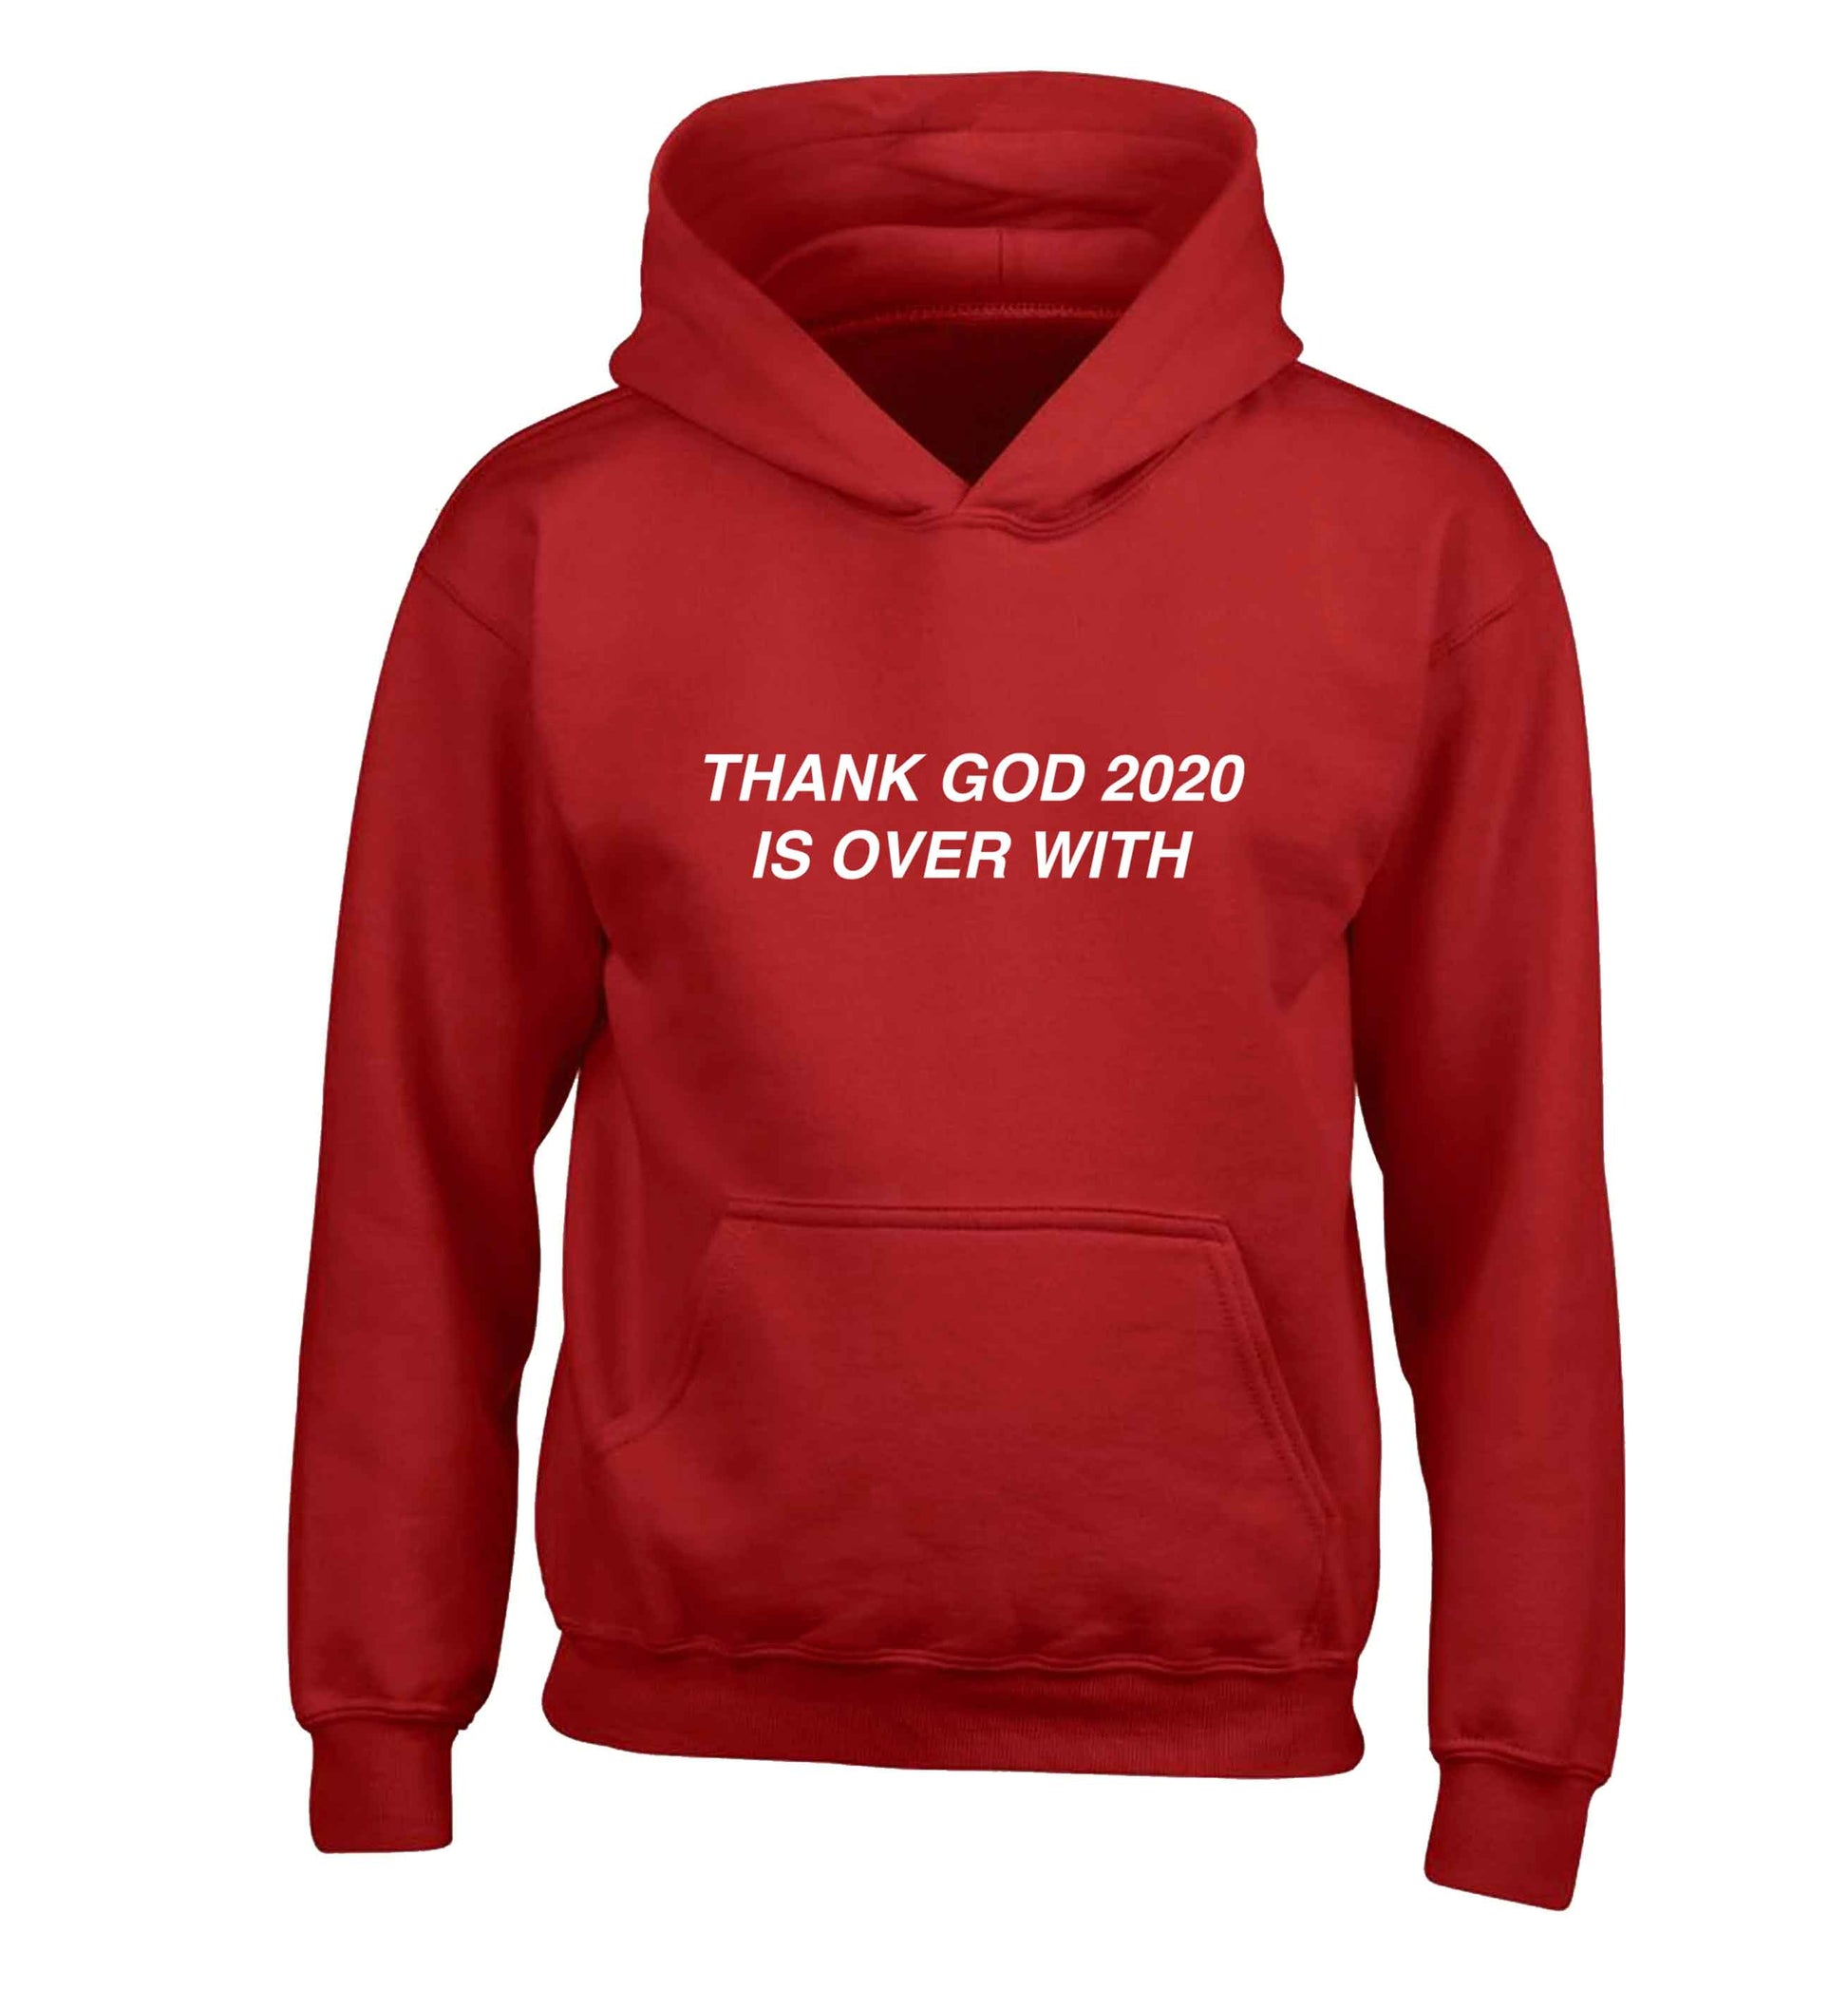 Thank god 2020 is over with children's red hoodie 12-13 Years